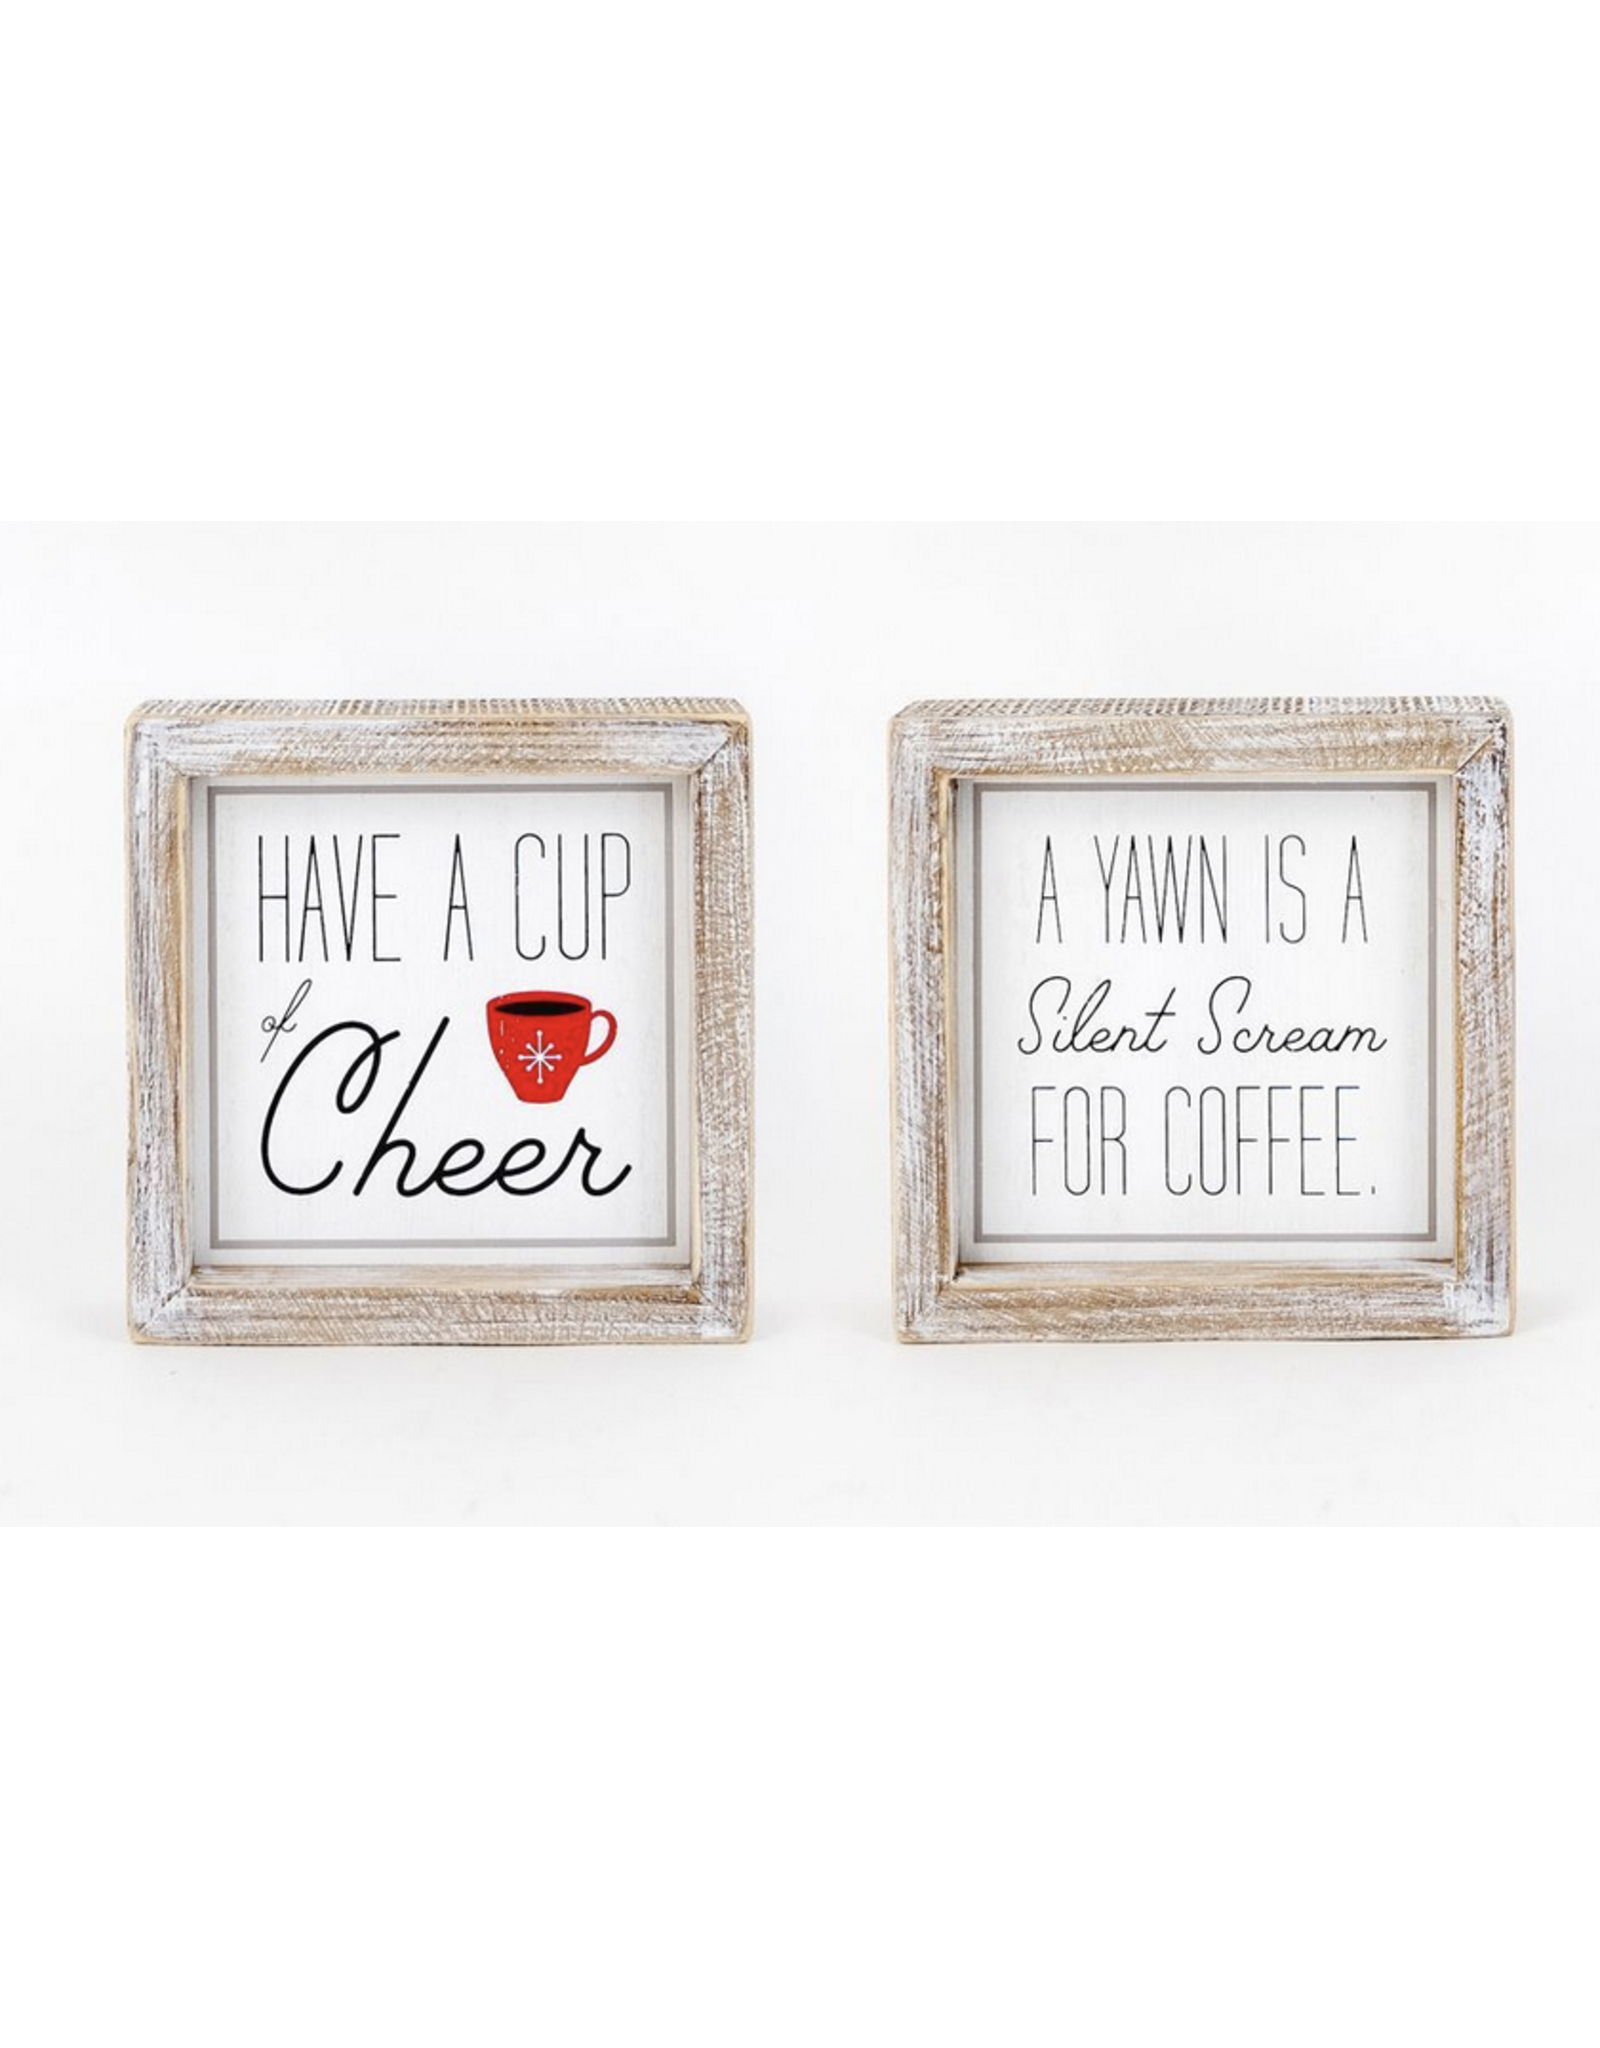 Adams & Co. Cup of Cheer/Scream for Coffee Reversible Sign